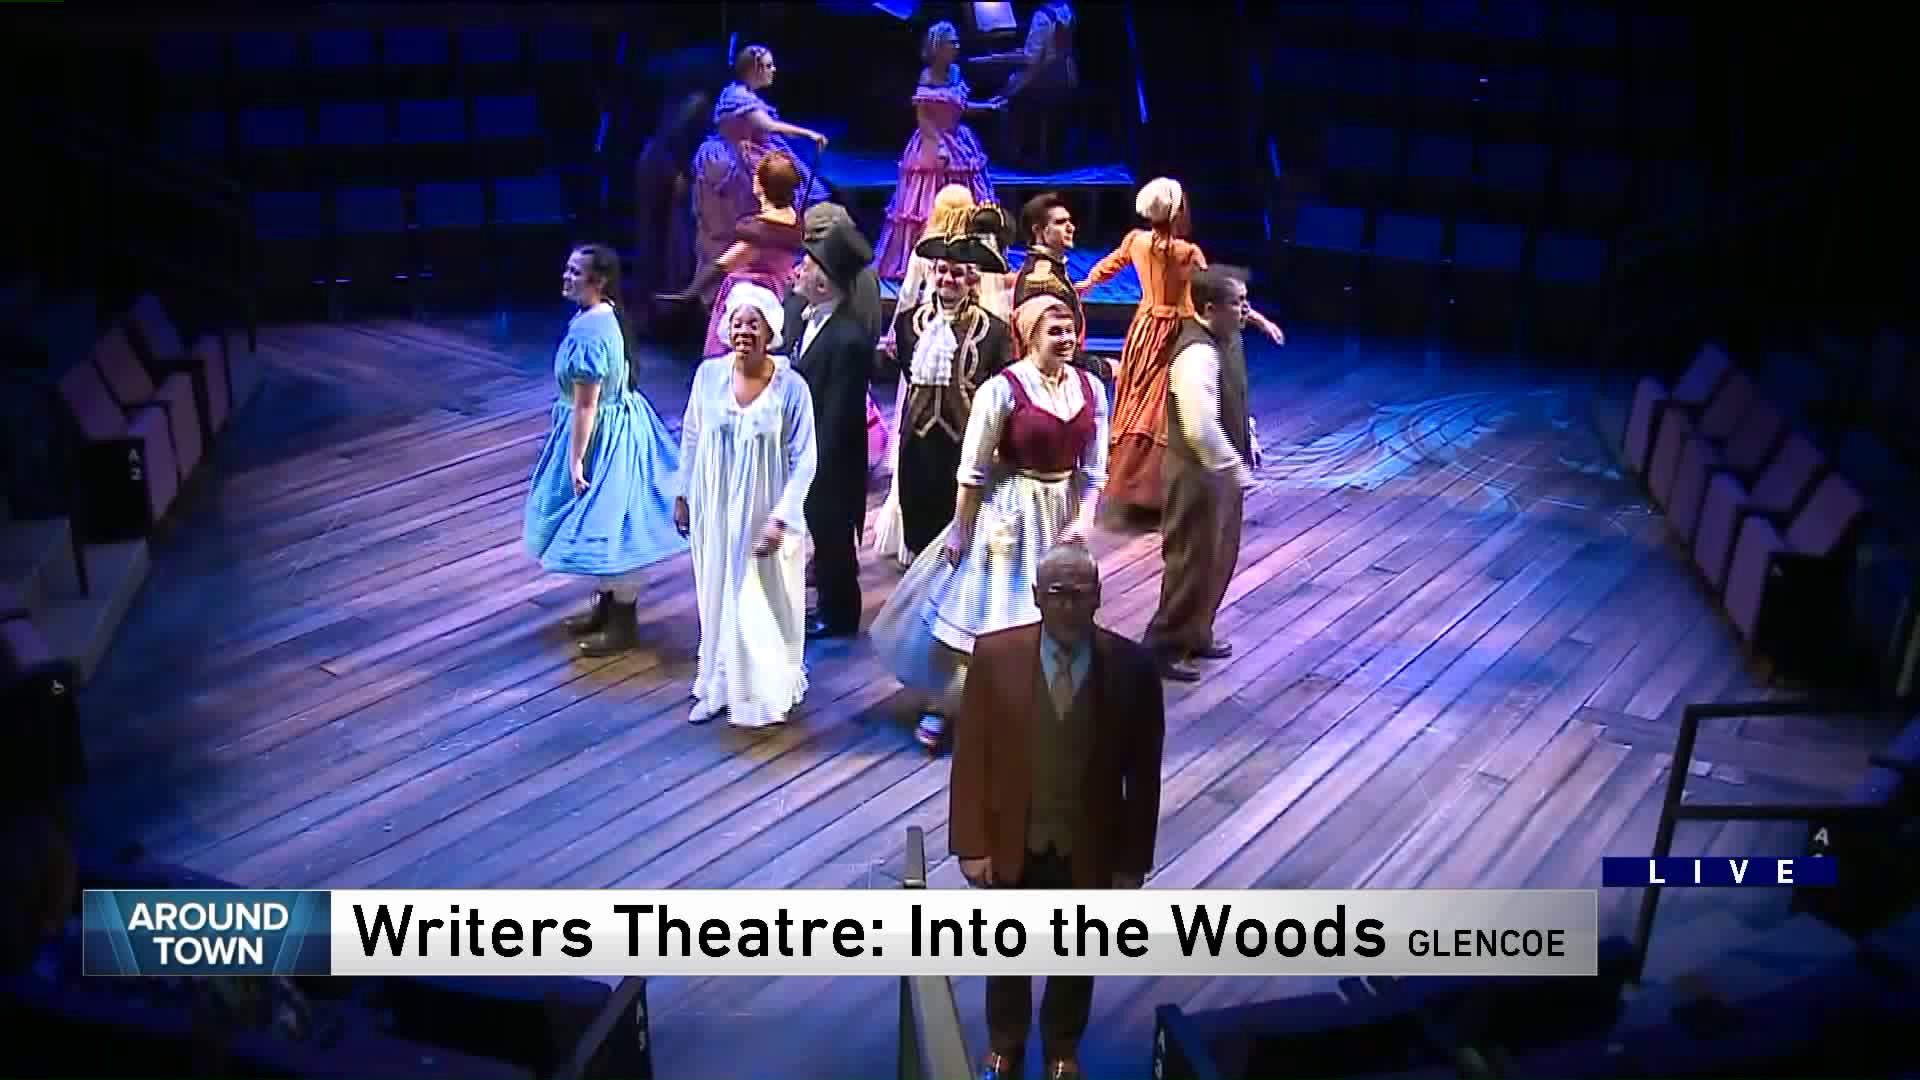 Around Town previews ‘Into the Woods’ at Writers Theatre